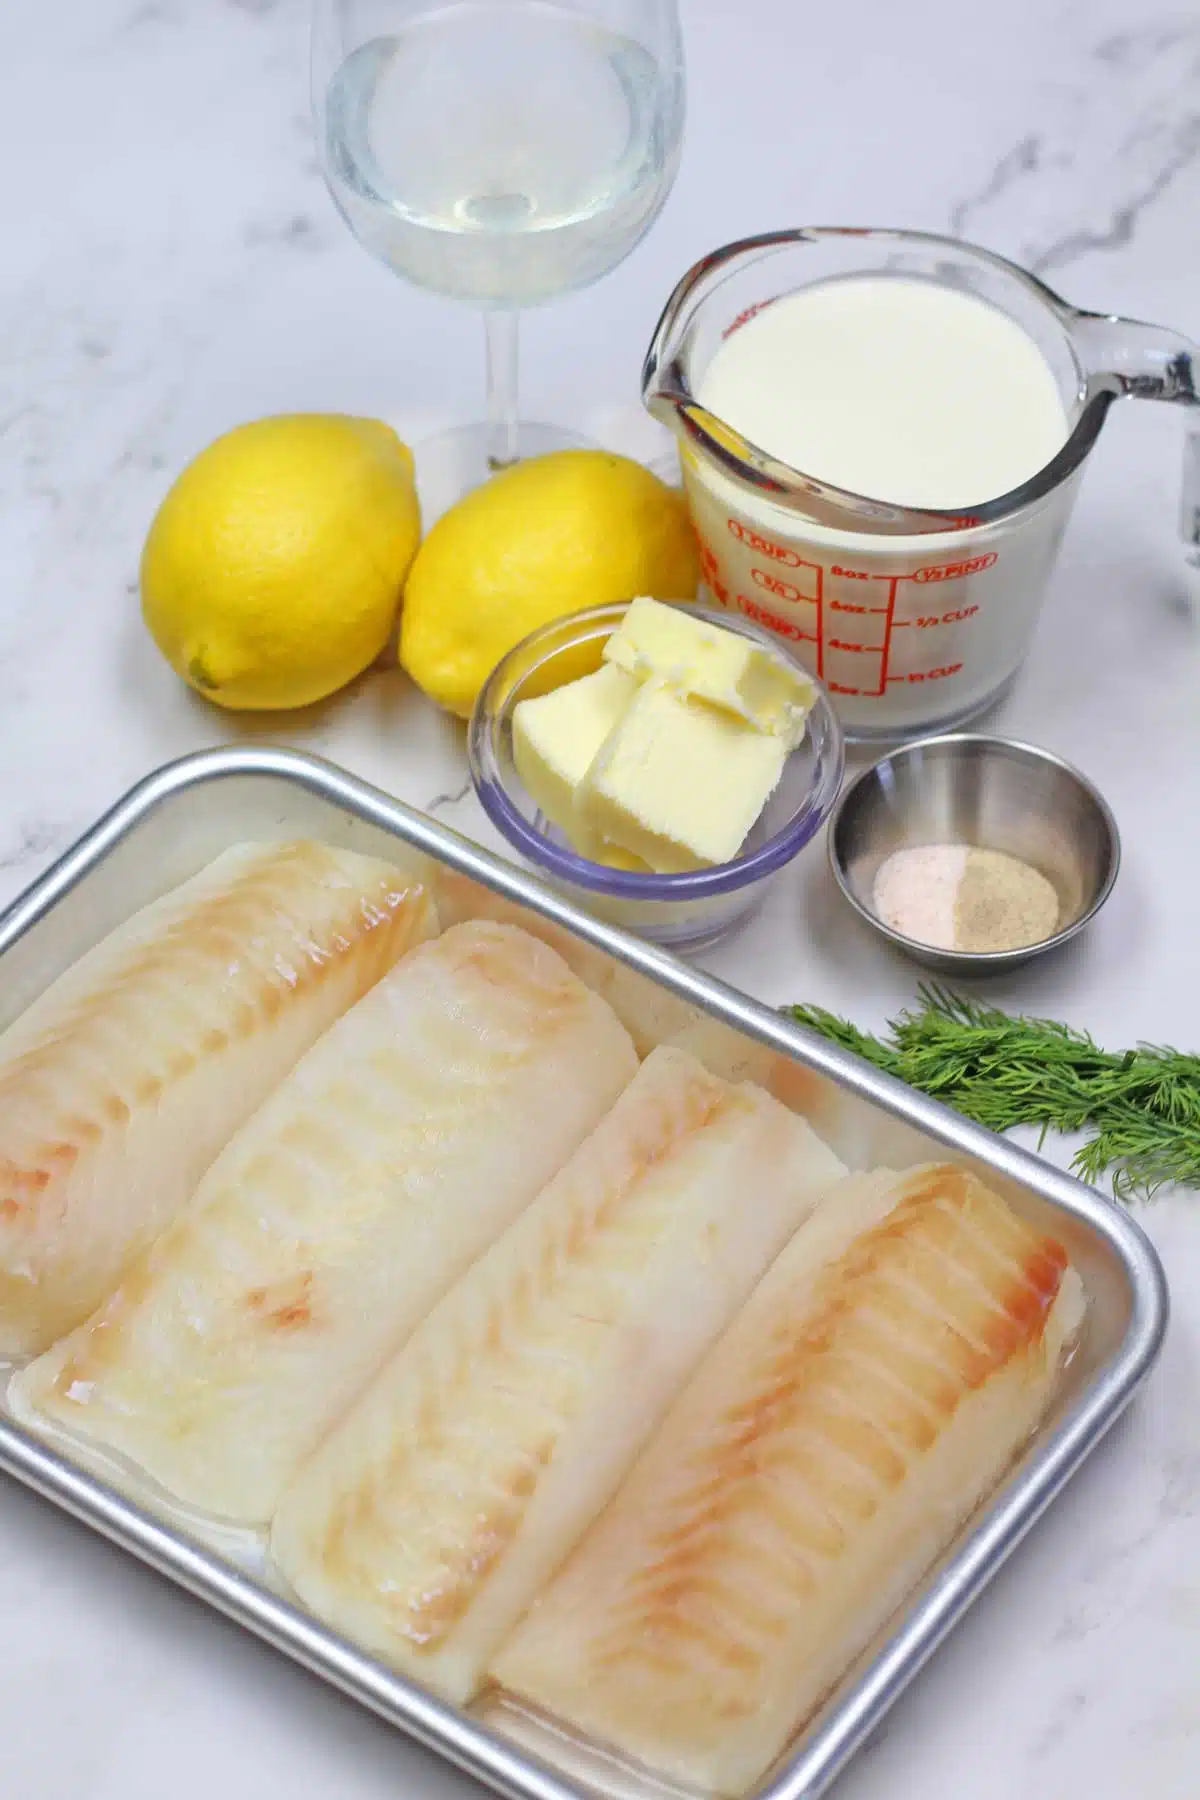 Ingredient image showing what is needed to make lemon butter baked cod.